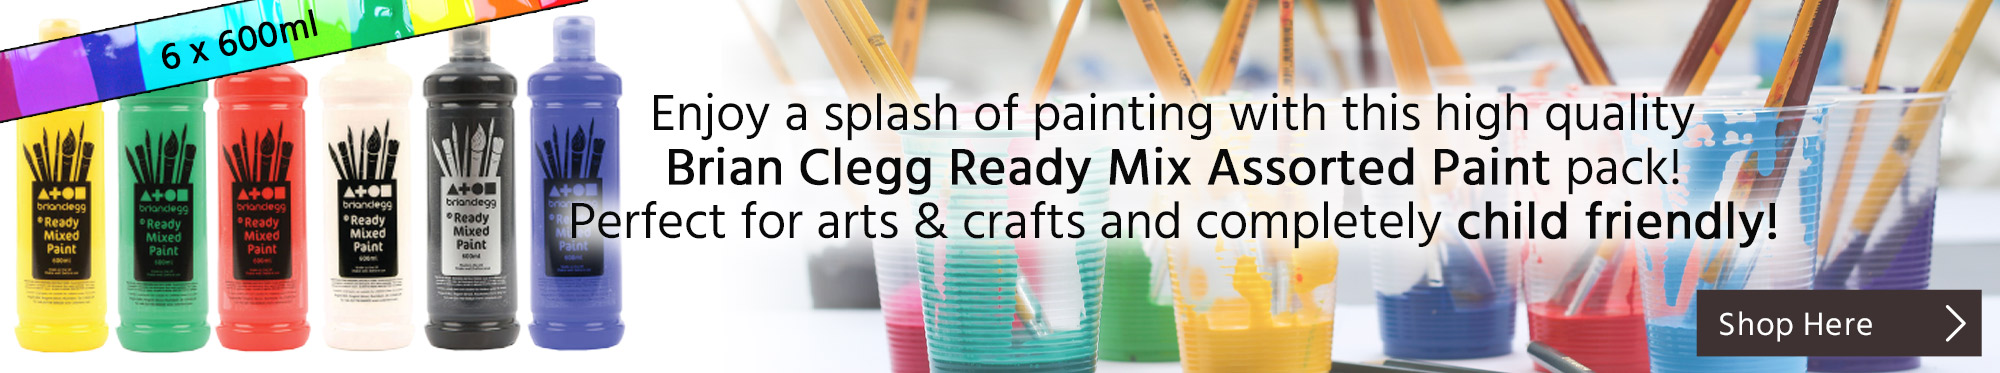 Enjoy a Splash of Painting with This High Quality Paint Pack from Brian Clegg